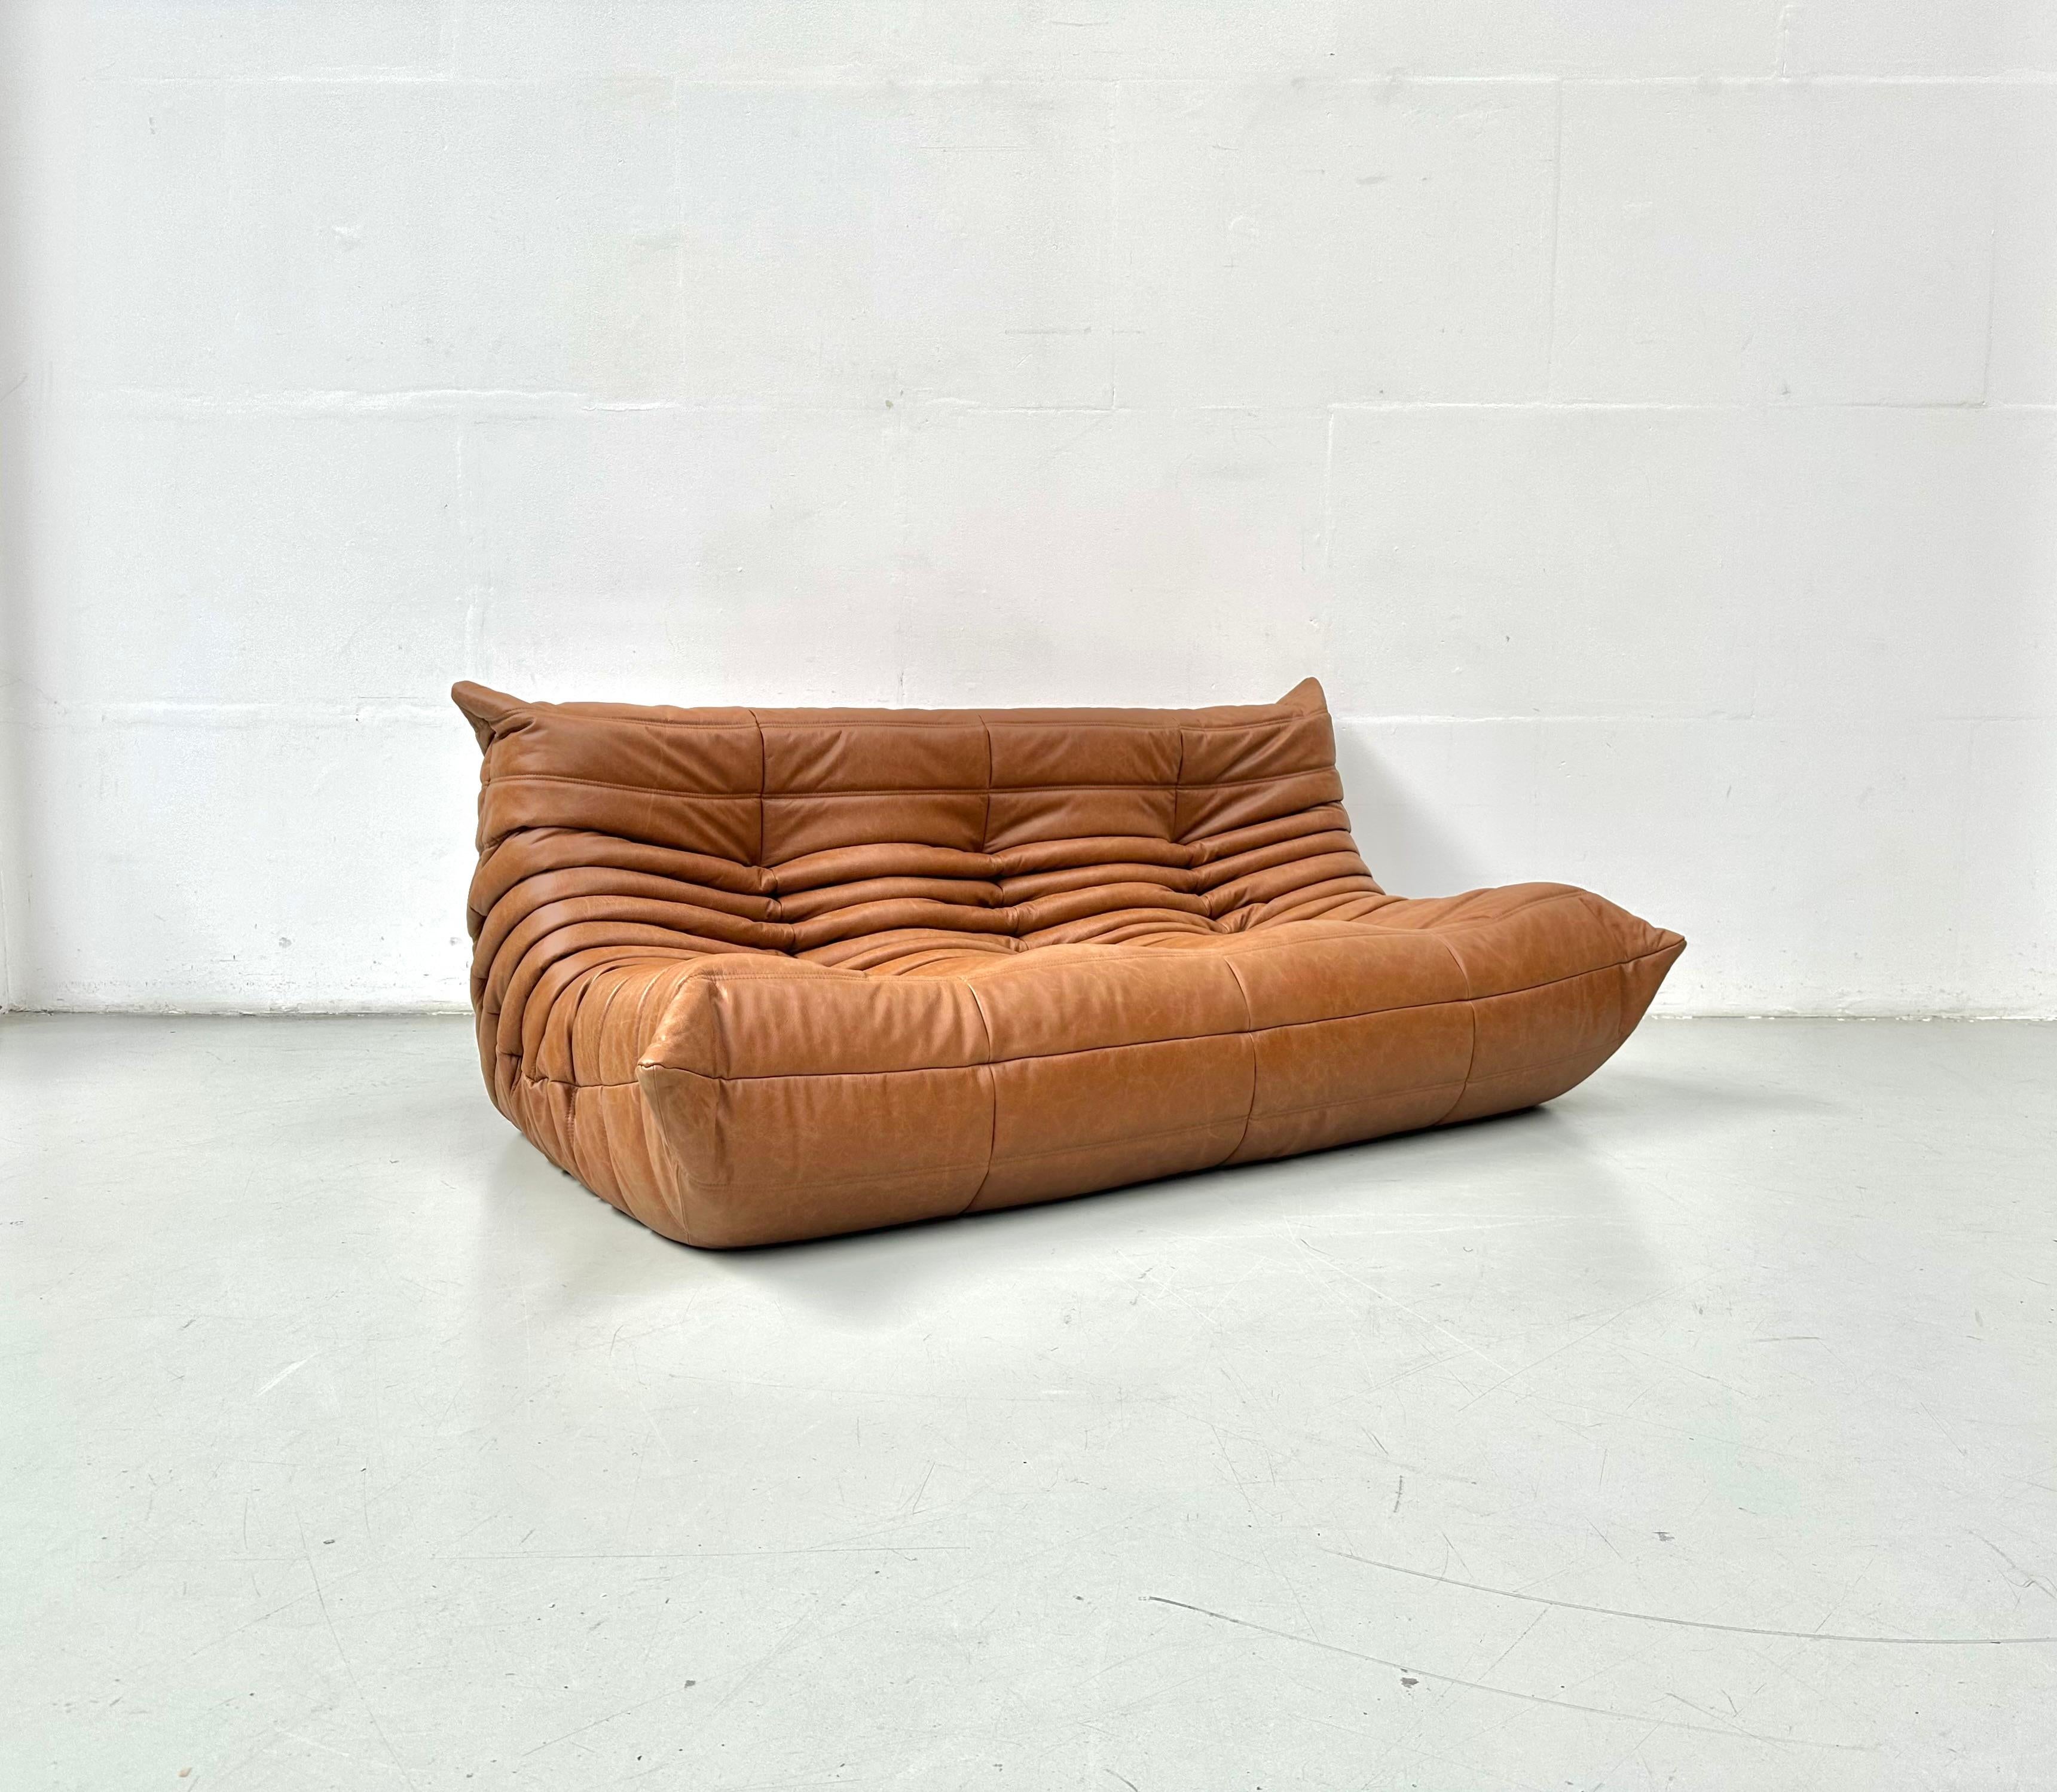 French Togo Sofa in Cognac  Leather by Michel Ducaroy for Ligne Roset. 1